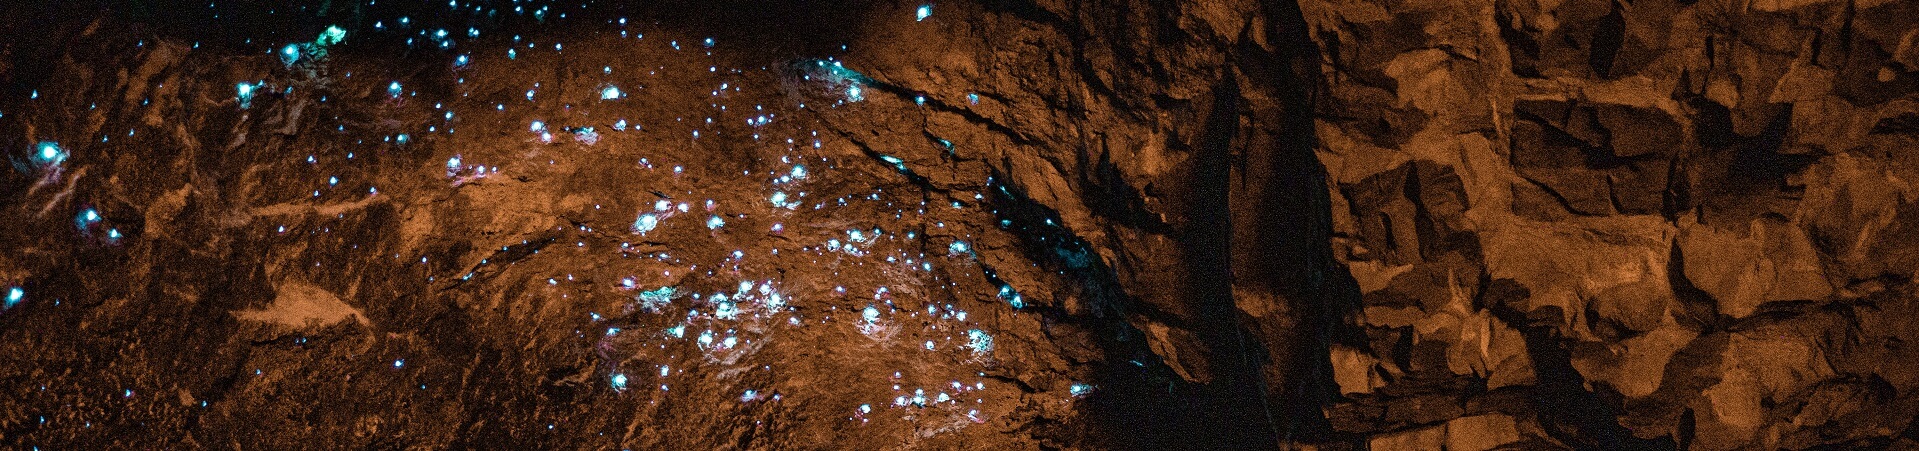 When can you see glow worms at the Natural Bridge?